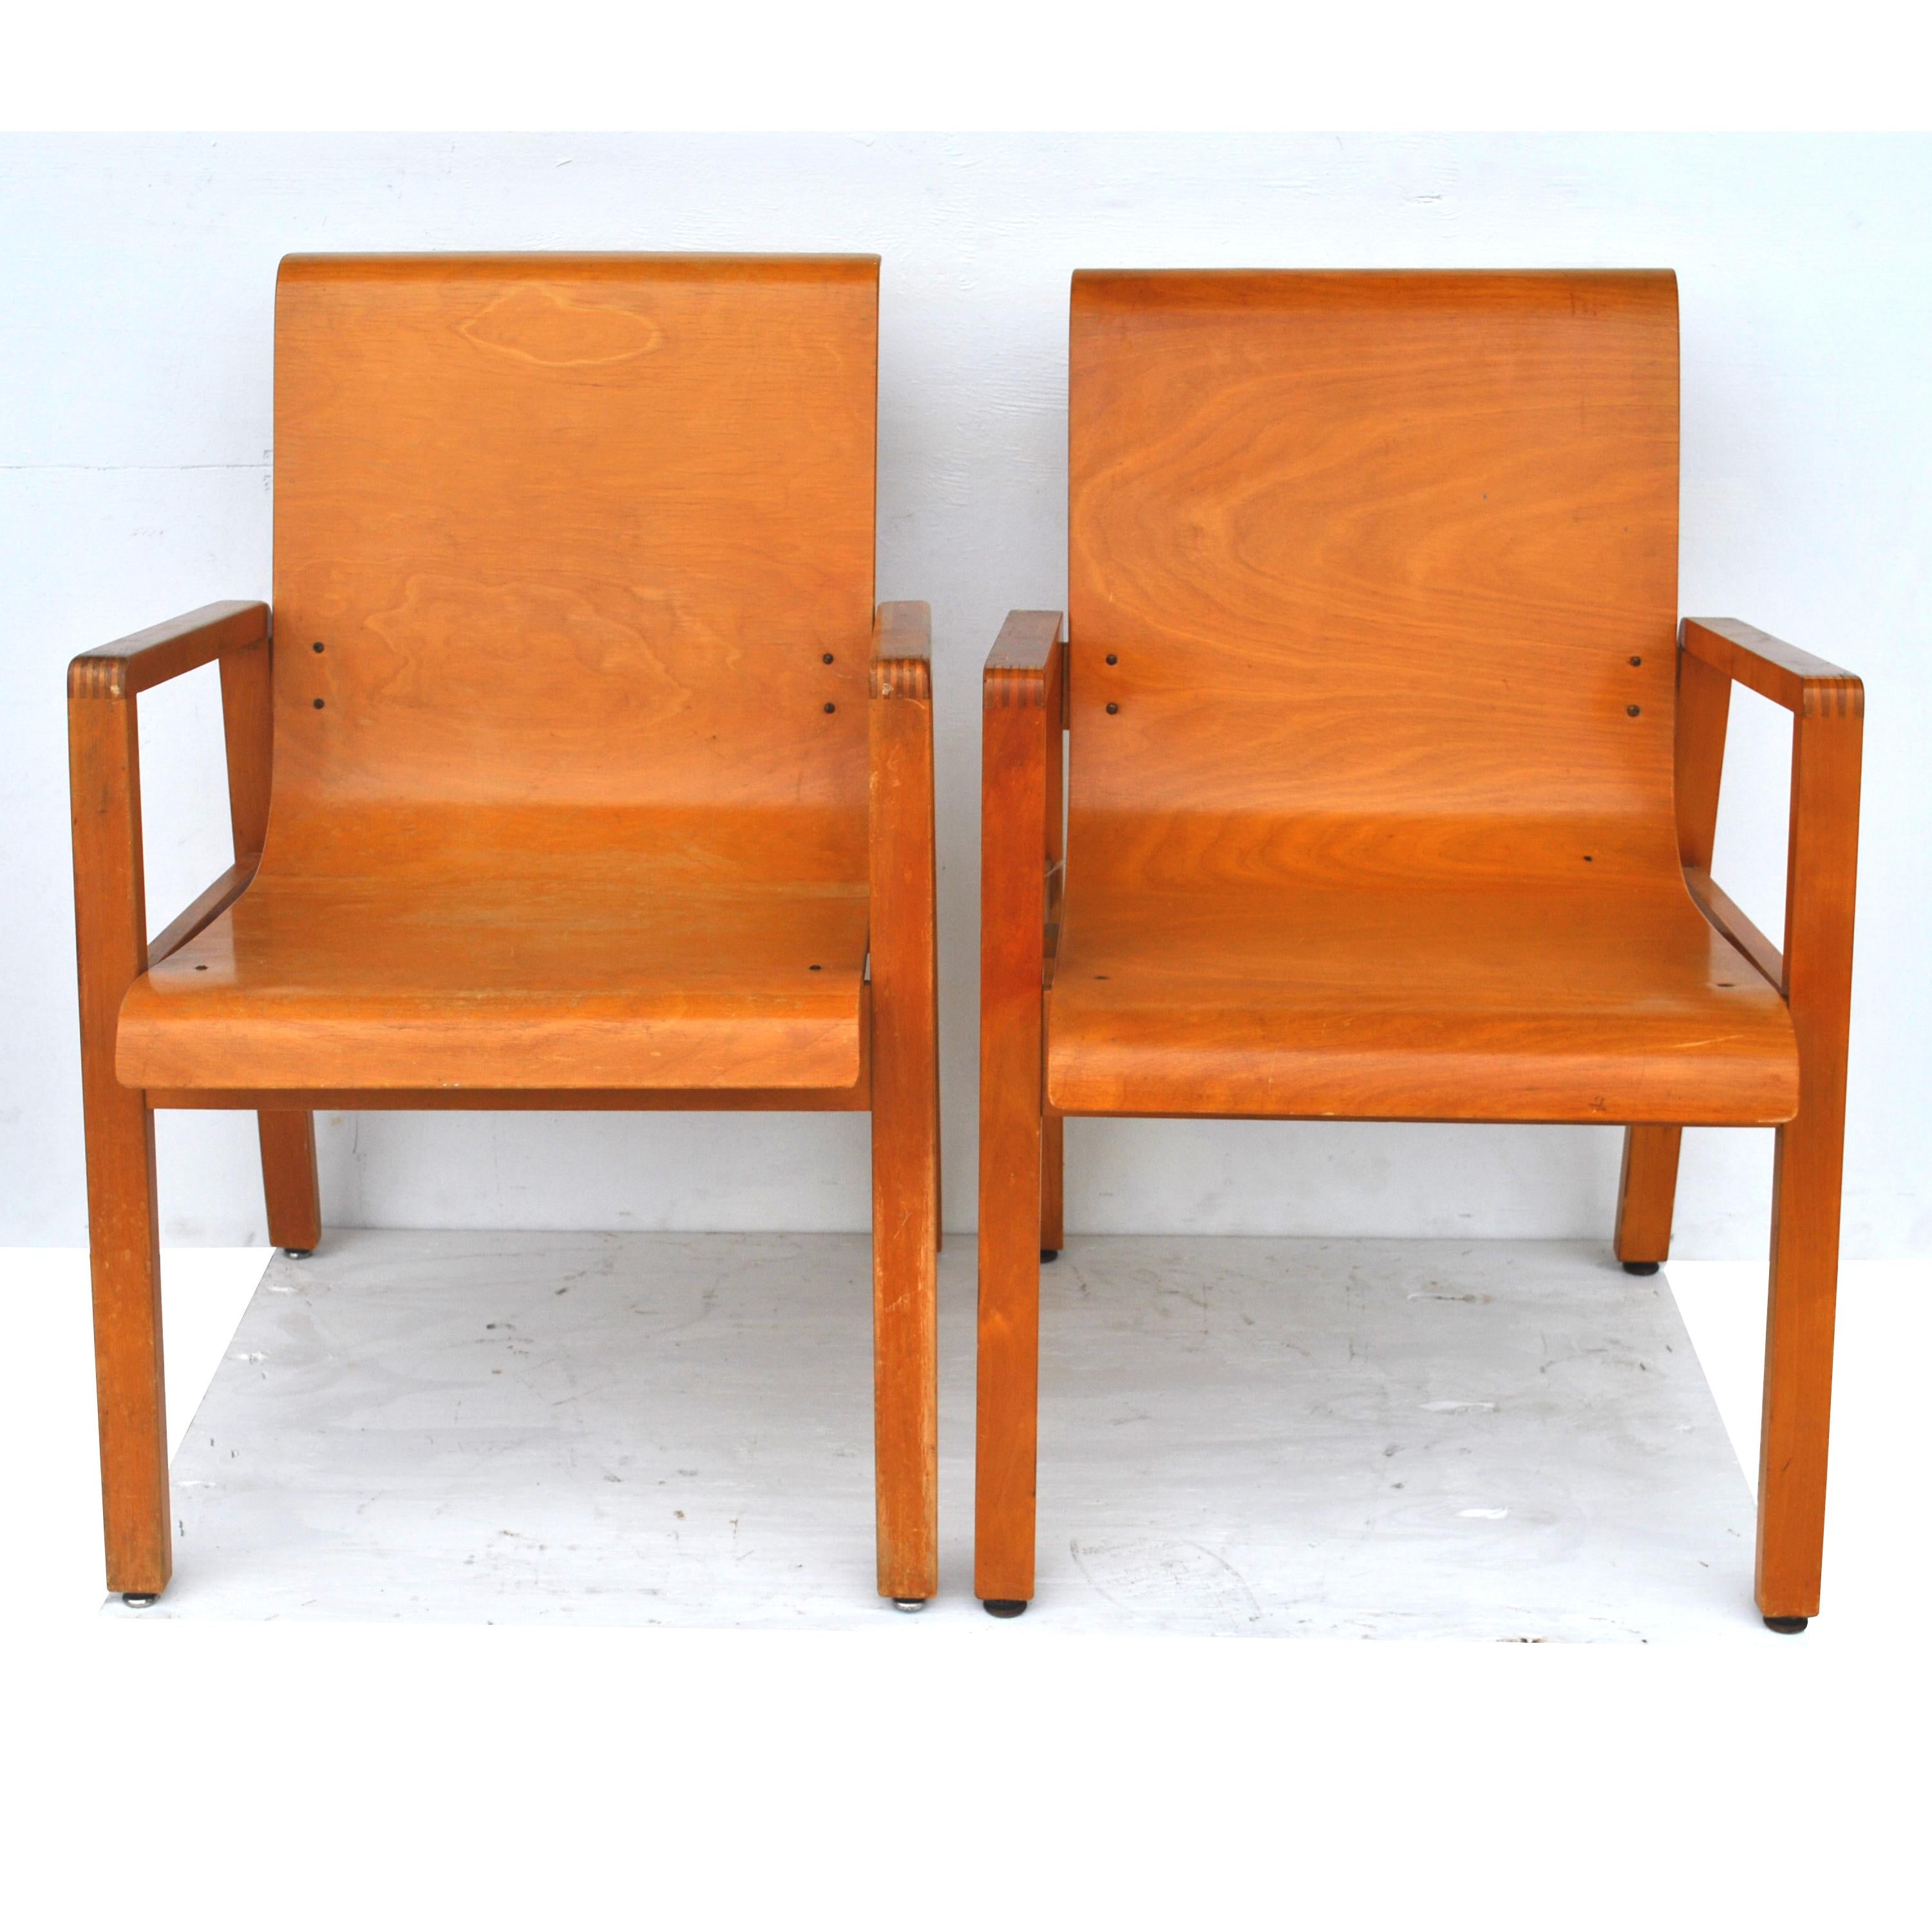 Vintage Pair of Hallway 403 Chairs by Alvar Aalto In Good Condition For Sale In Pasadena, TX